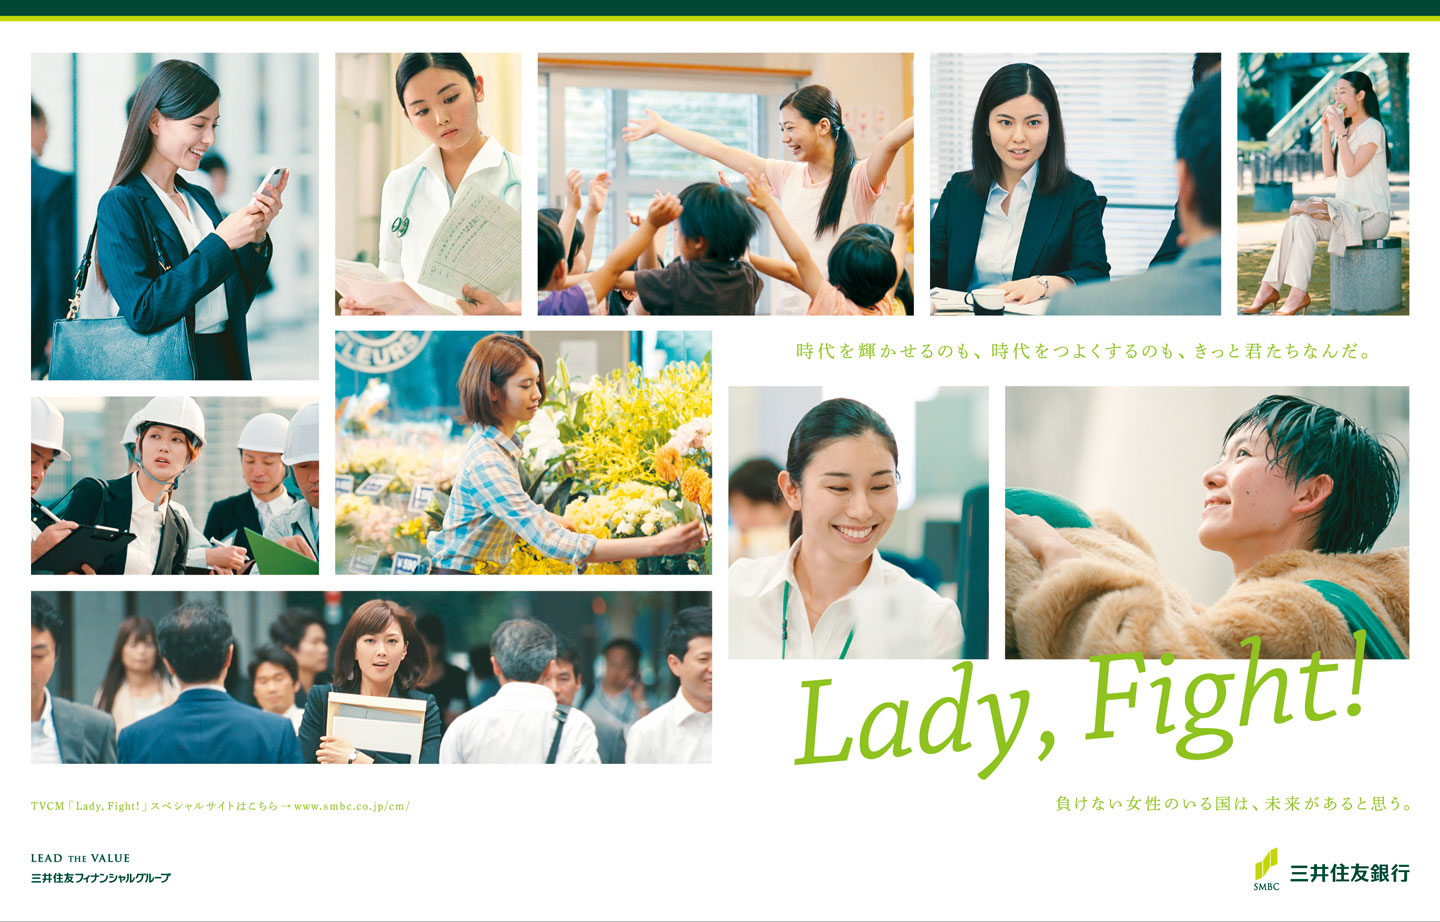 Sumitomo Mitsui Banking Corporation lady fight commercial